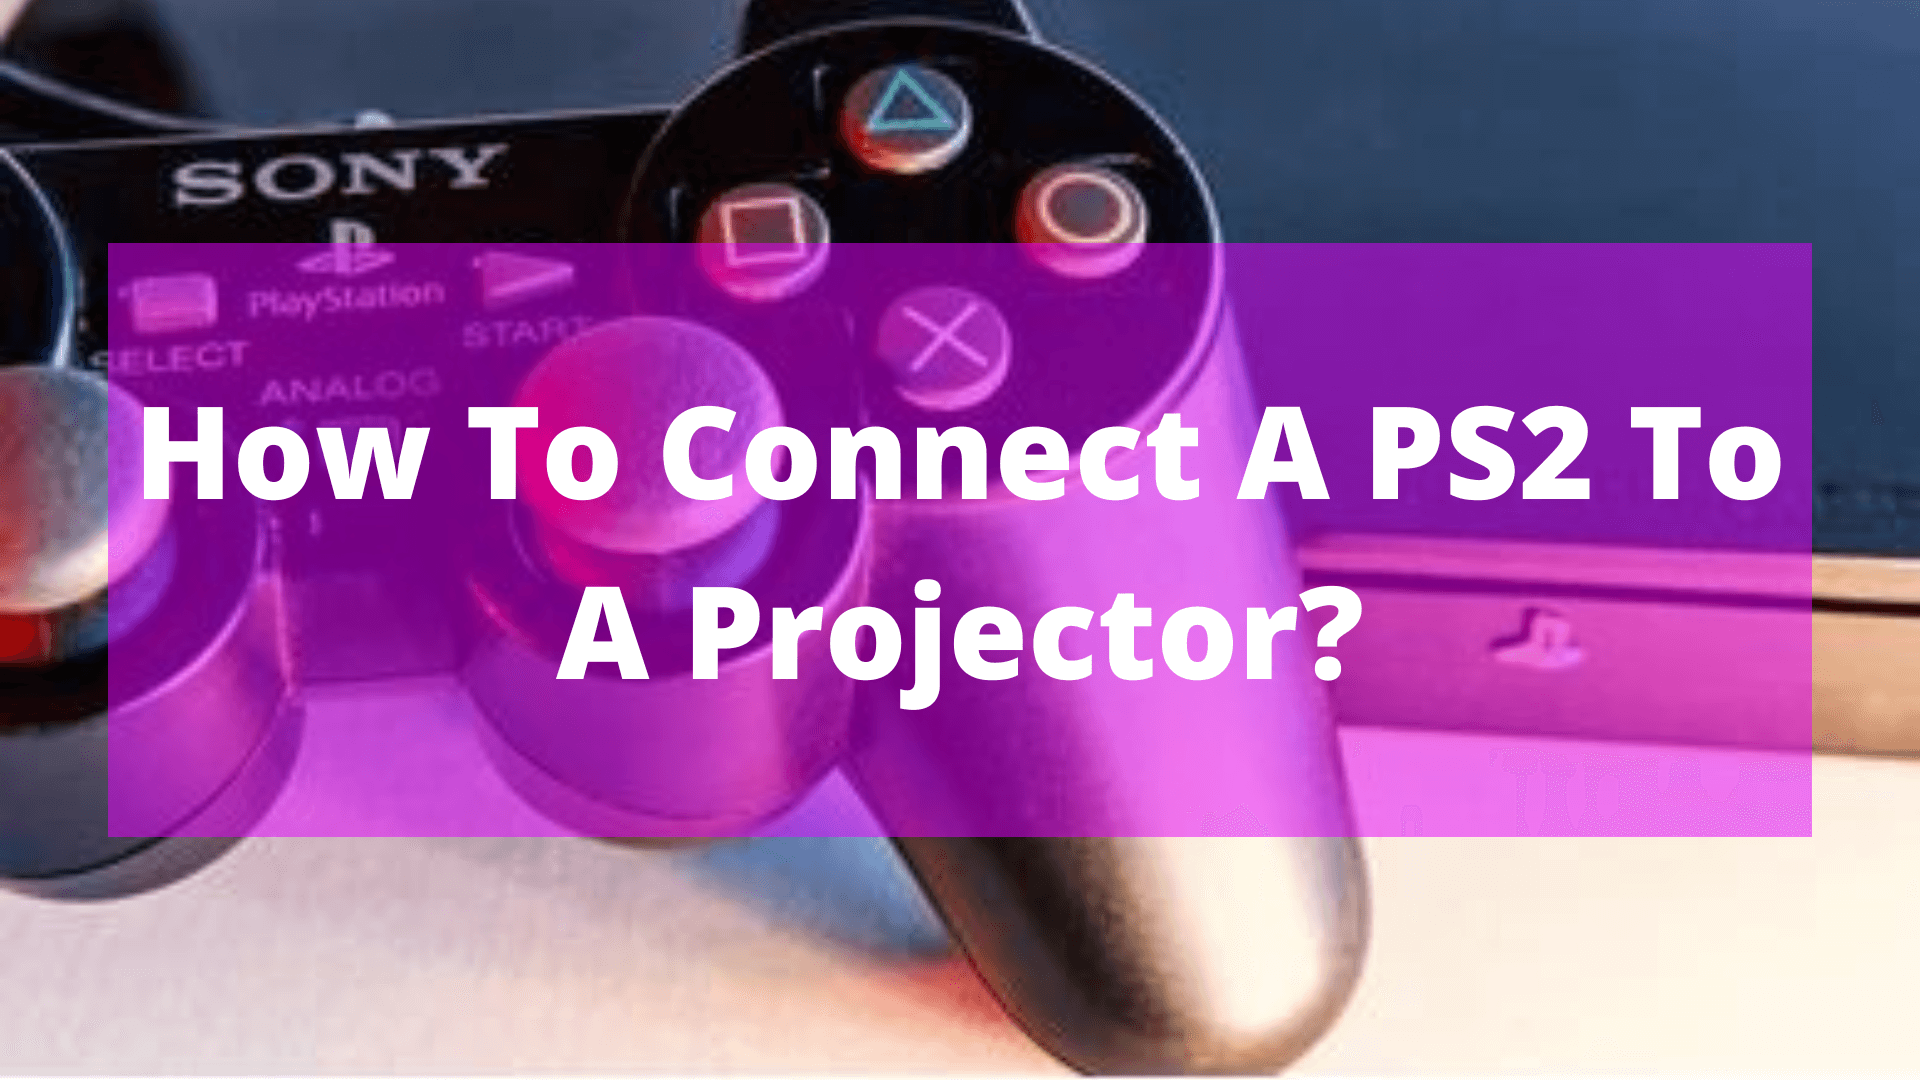 How To Connect A PS2 To A Projector